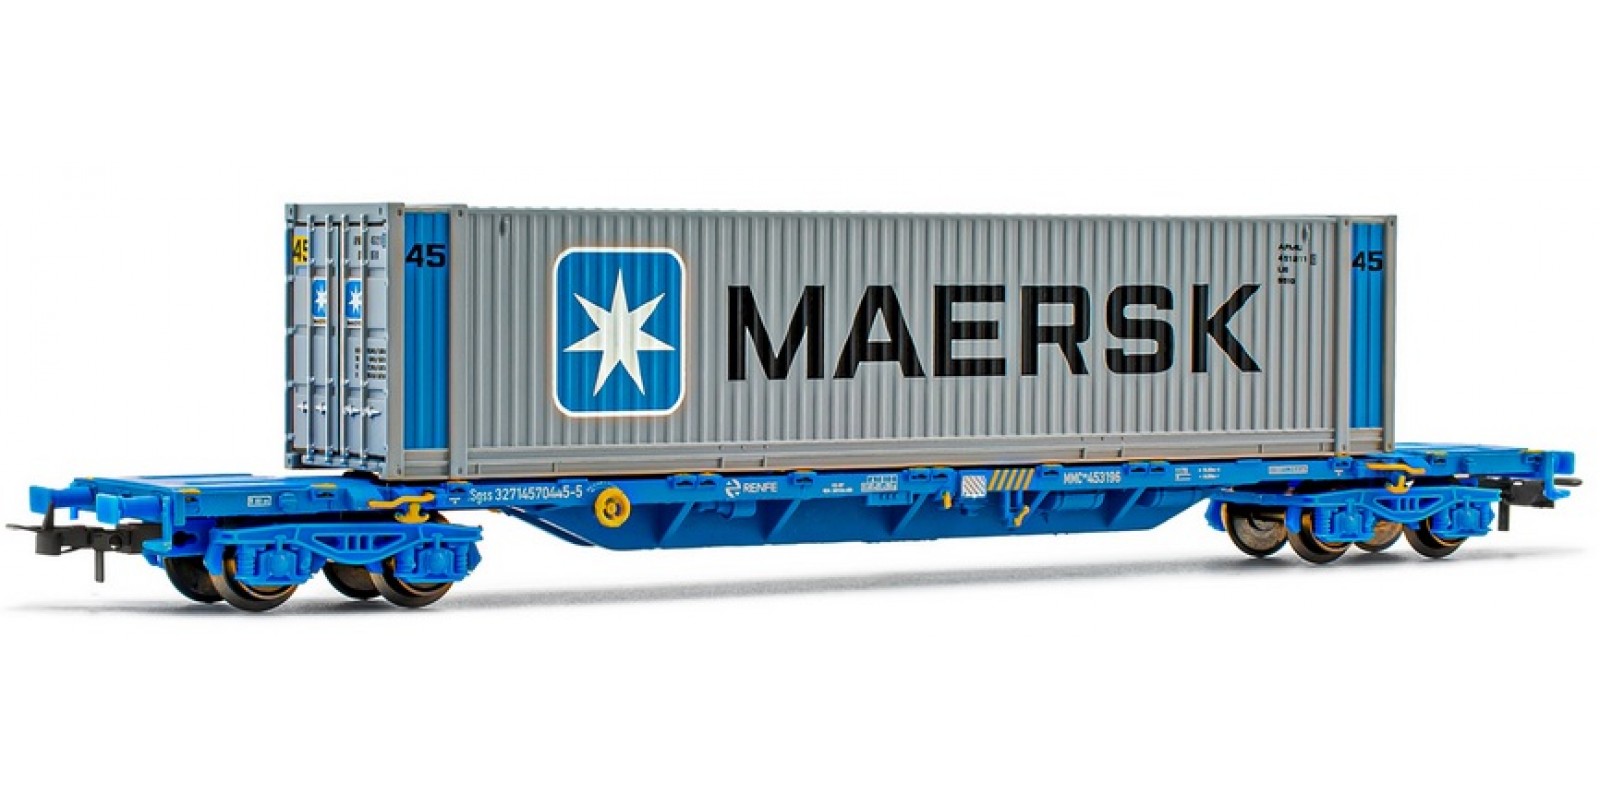 ET6044 RENFE, 4-axle container wagon MMC3, with 45' container MAERSK